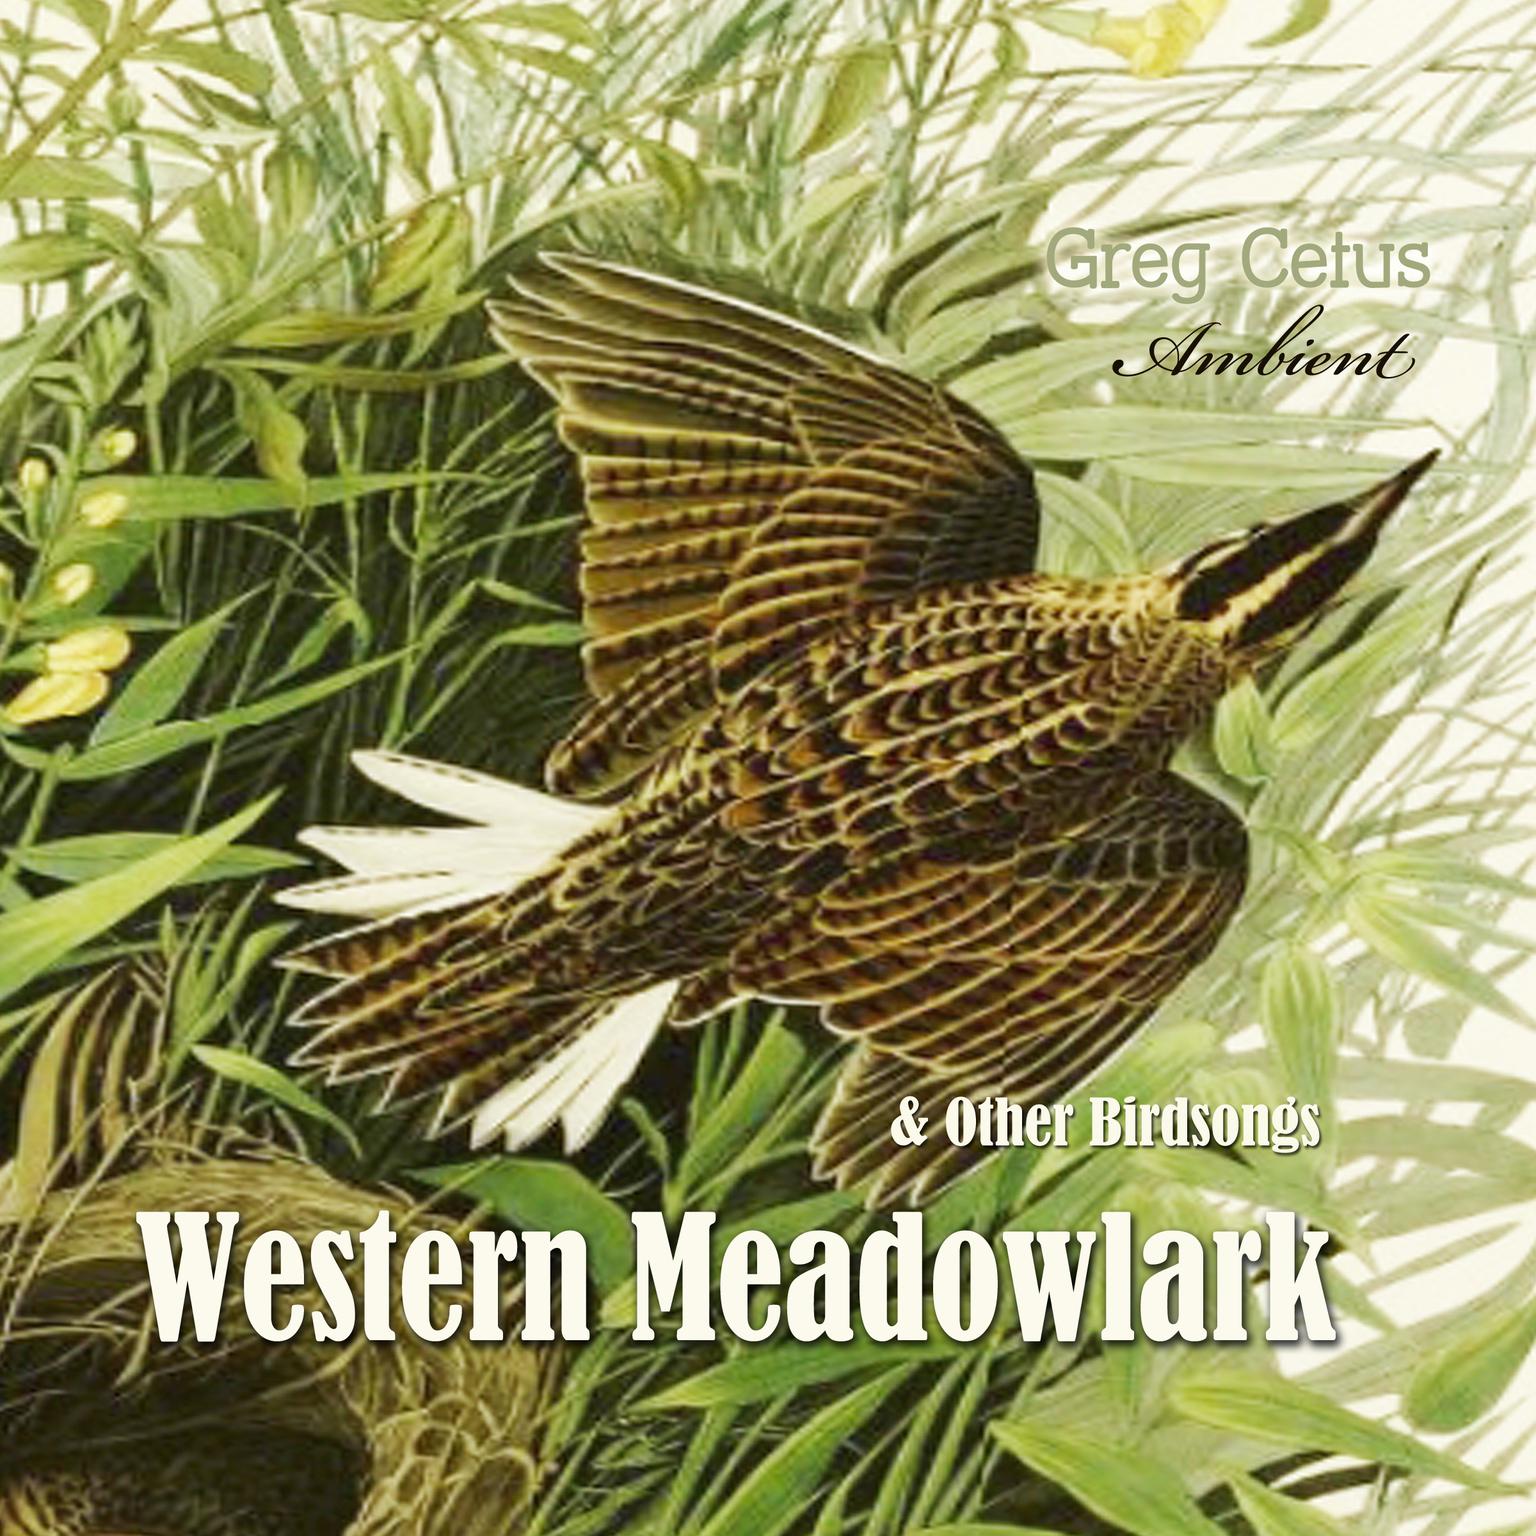 Western Meadowlark and Other Bird Songs Audiobook, by Greg Cetus